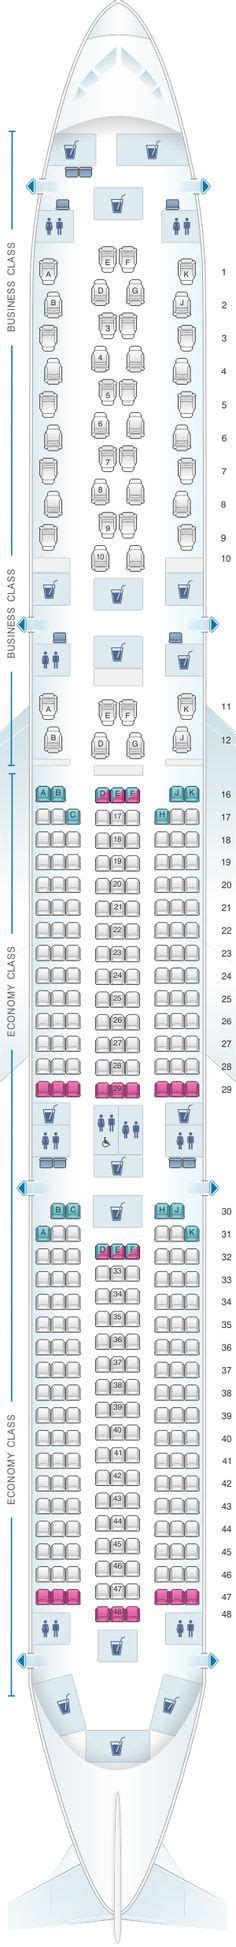 Detailed Seat Map Us Airways Airbus A321 Find The Best Airplanes Seats